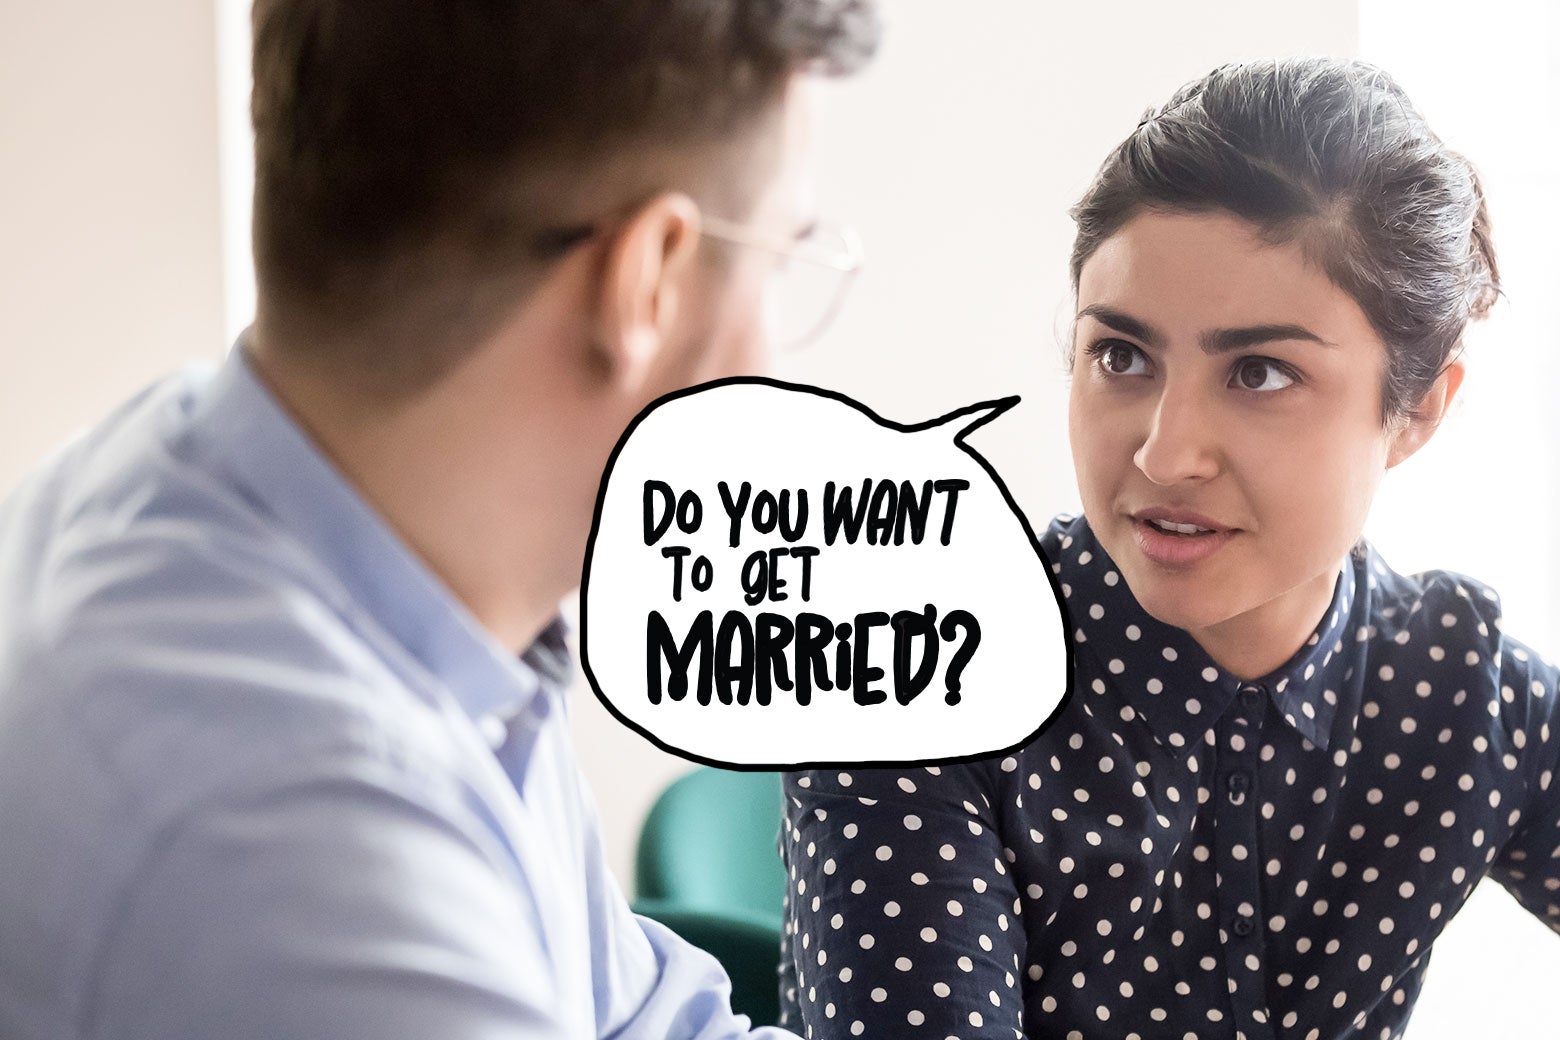 I Never Proposed to My Boyfriend. Except One Day, He Started Telling Everyone I Had.